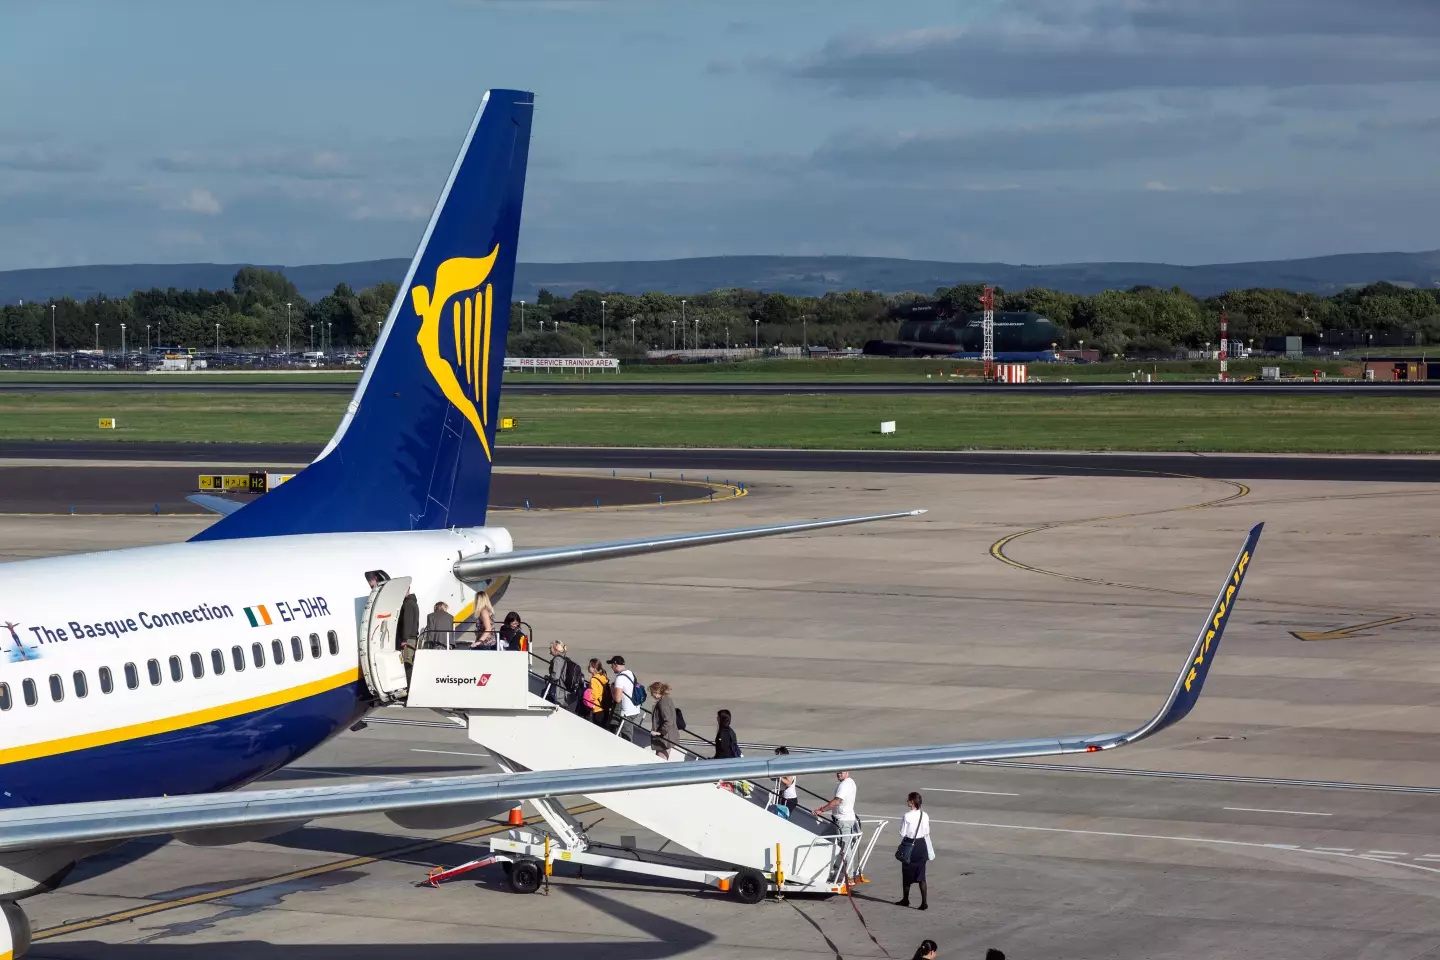 The 27-year-old was removed from a RyanAir flight at Manchester Airport.